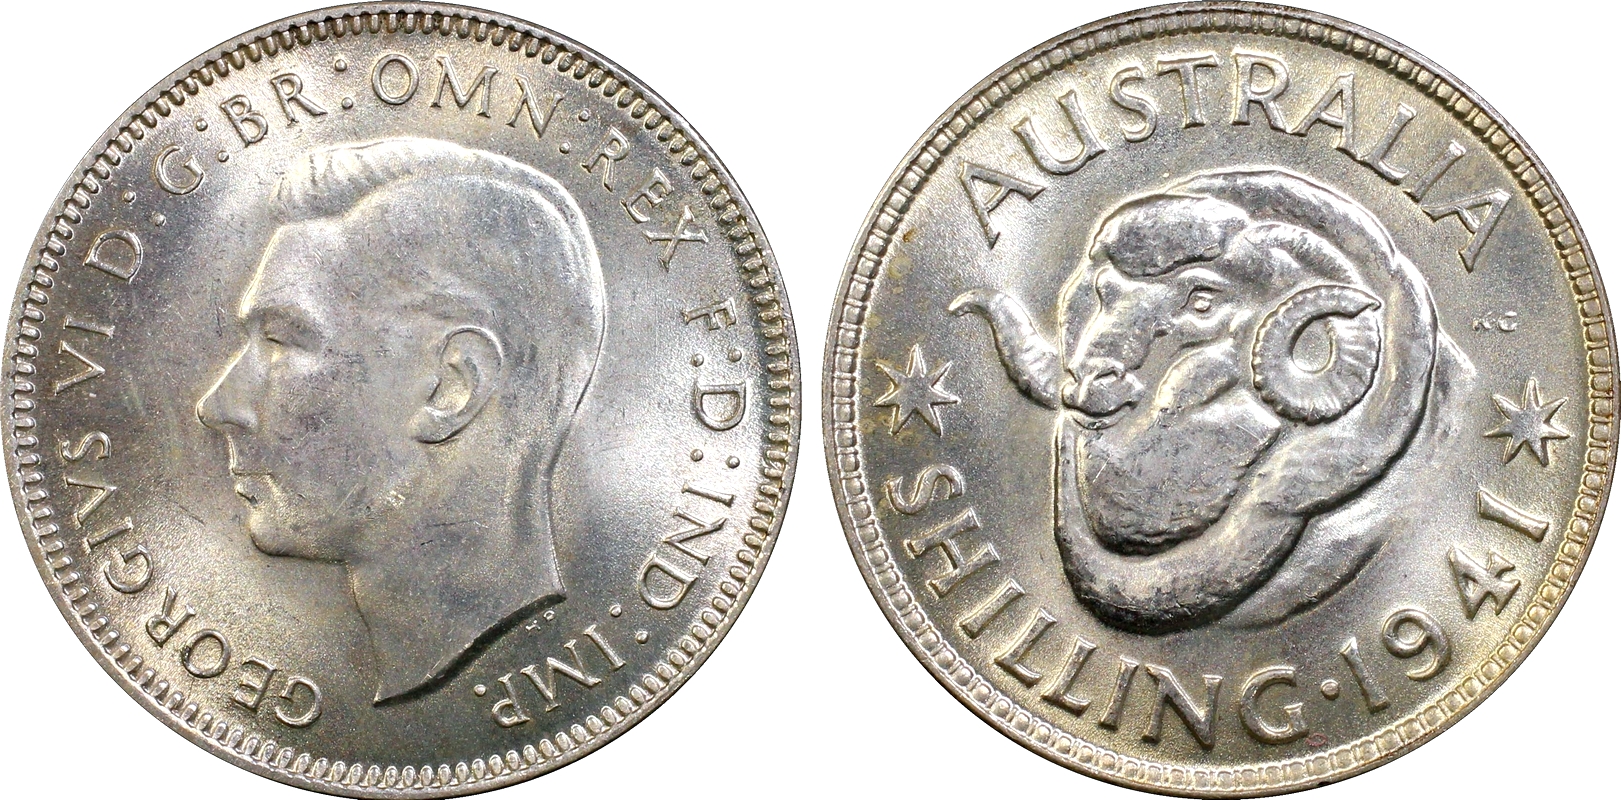 1941 Australian Shilling, PCGS MS63 'Uncirculated' - Click Image to Close